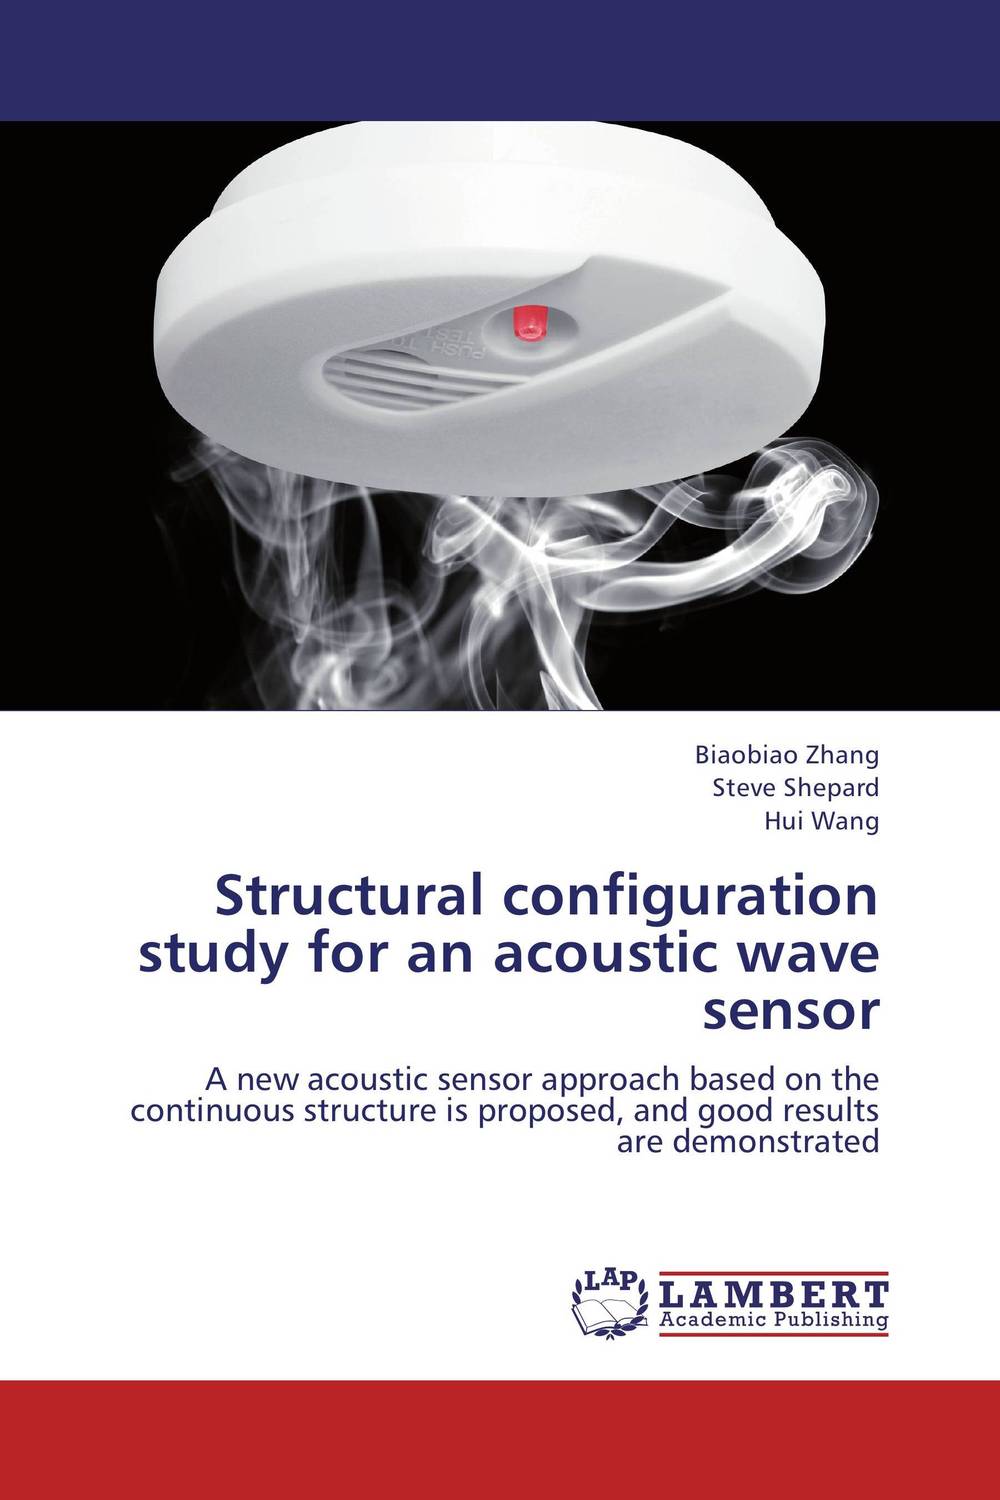 Structural configuration study for an acoustic wave sensor